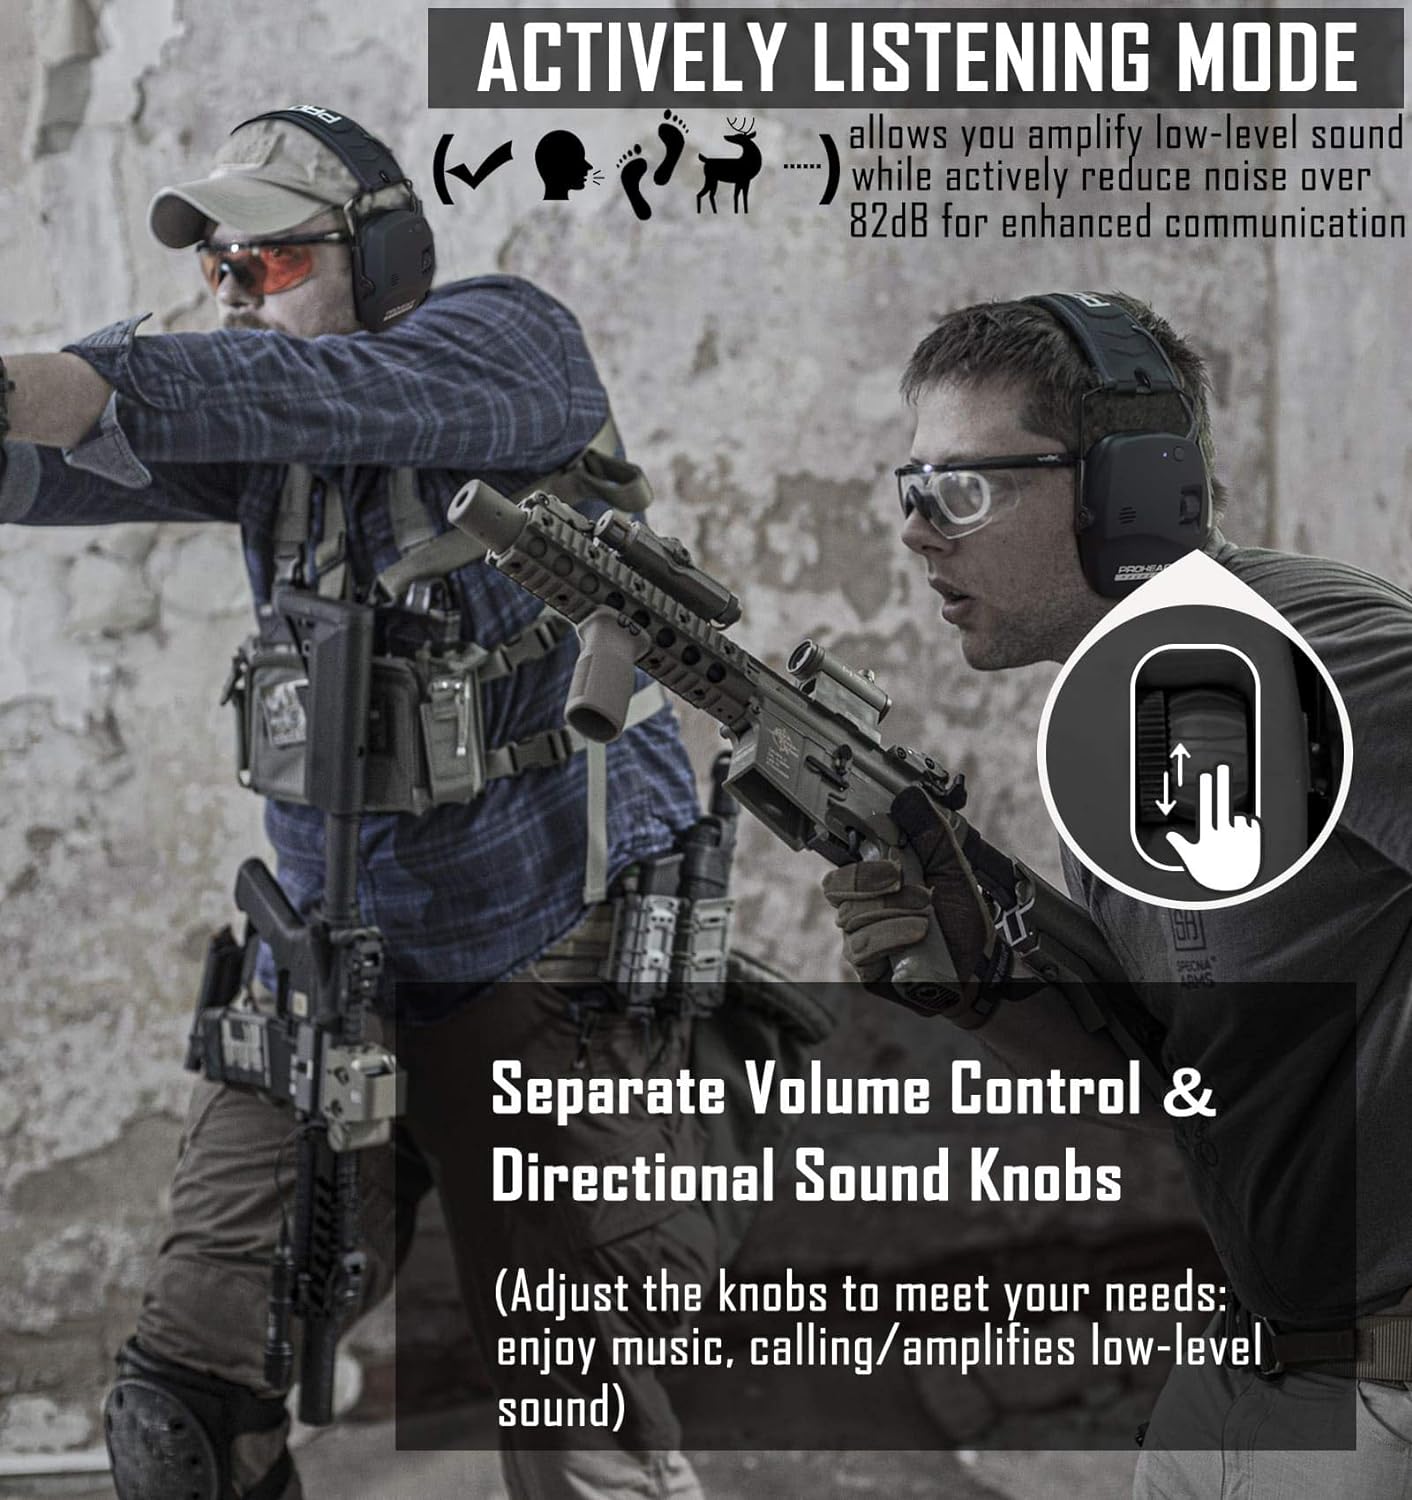 PROHEAR 030 Upgraded Bluetooth Electronic Shooting Hearing Protection Muffs with GEP02 Gel Ear Pads, Noise Reduction Sound Amplification Headsets for Gun Range, Hunting, Gifts for Women Man - Black